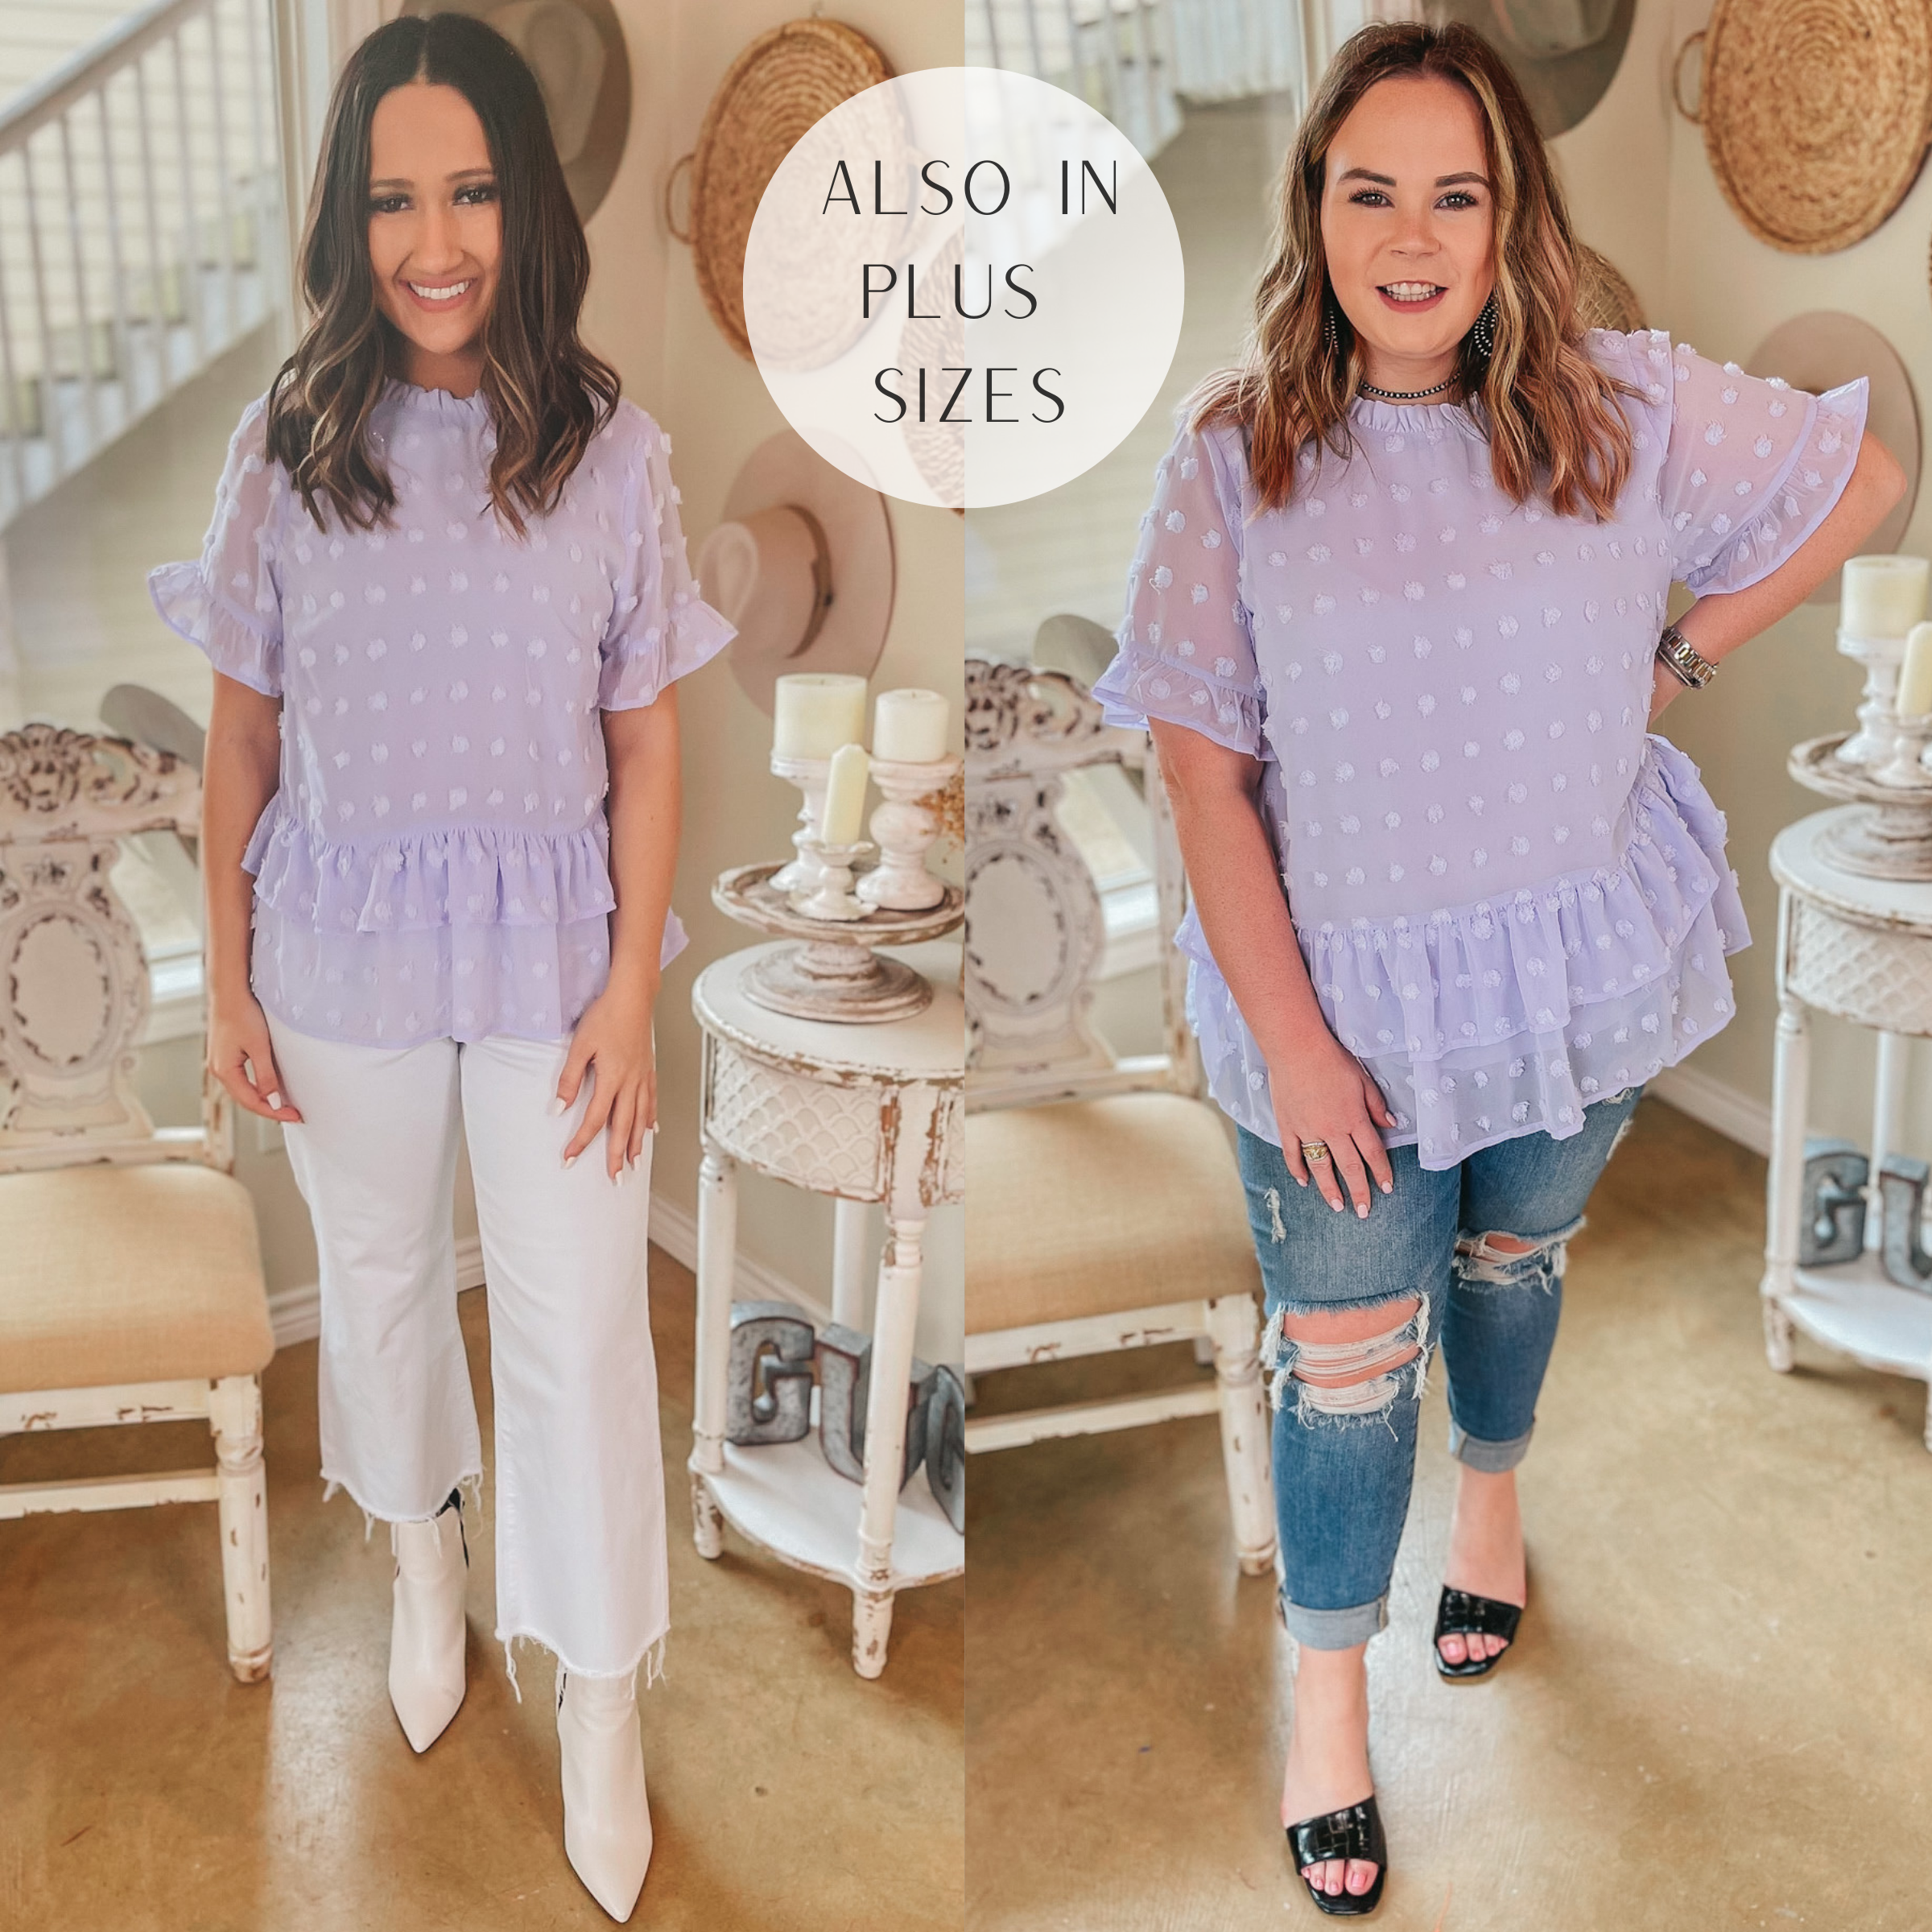 Last Chance Size S & L | Garden Graceful Swiss Dot Ruffle Peplum Top in Lavender - Giddy Up Glamour Boutique